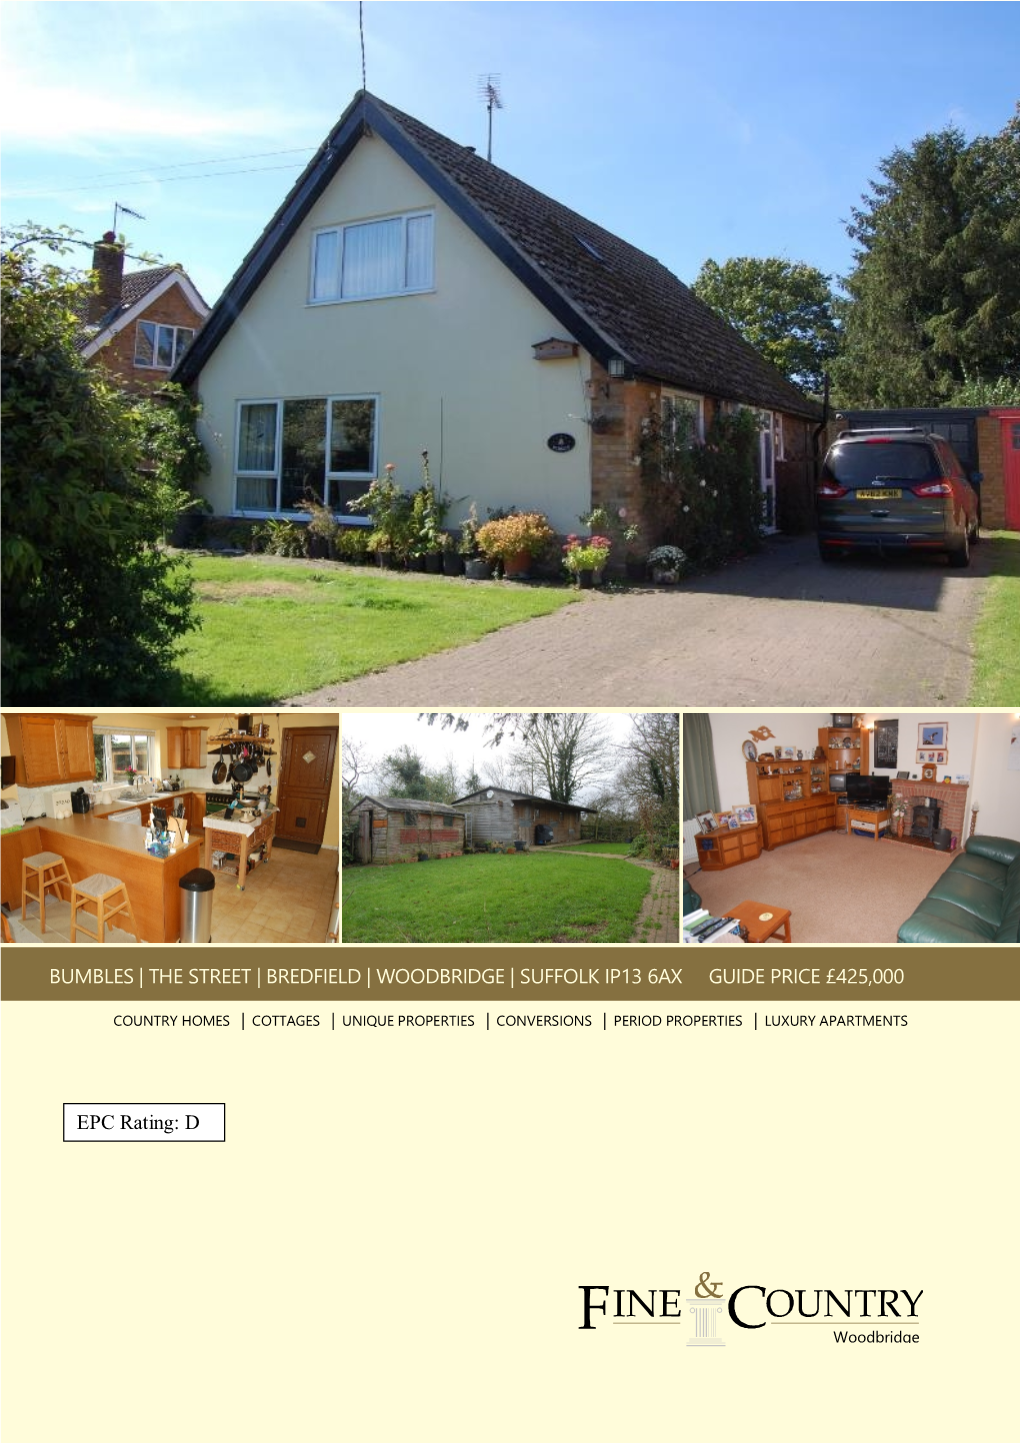 Bumbles | the Street | Bredfield | Woodbridge | Suffolk Ip13 6Ax Guide Price £425,000